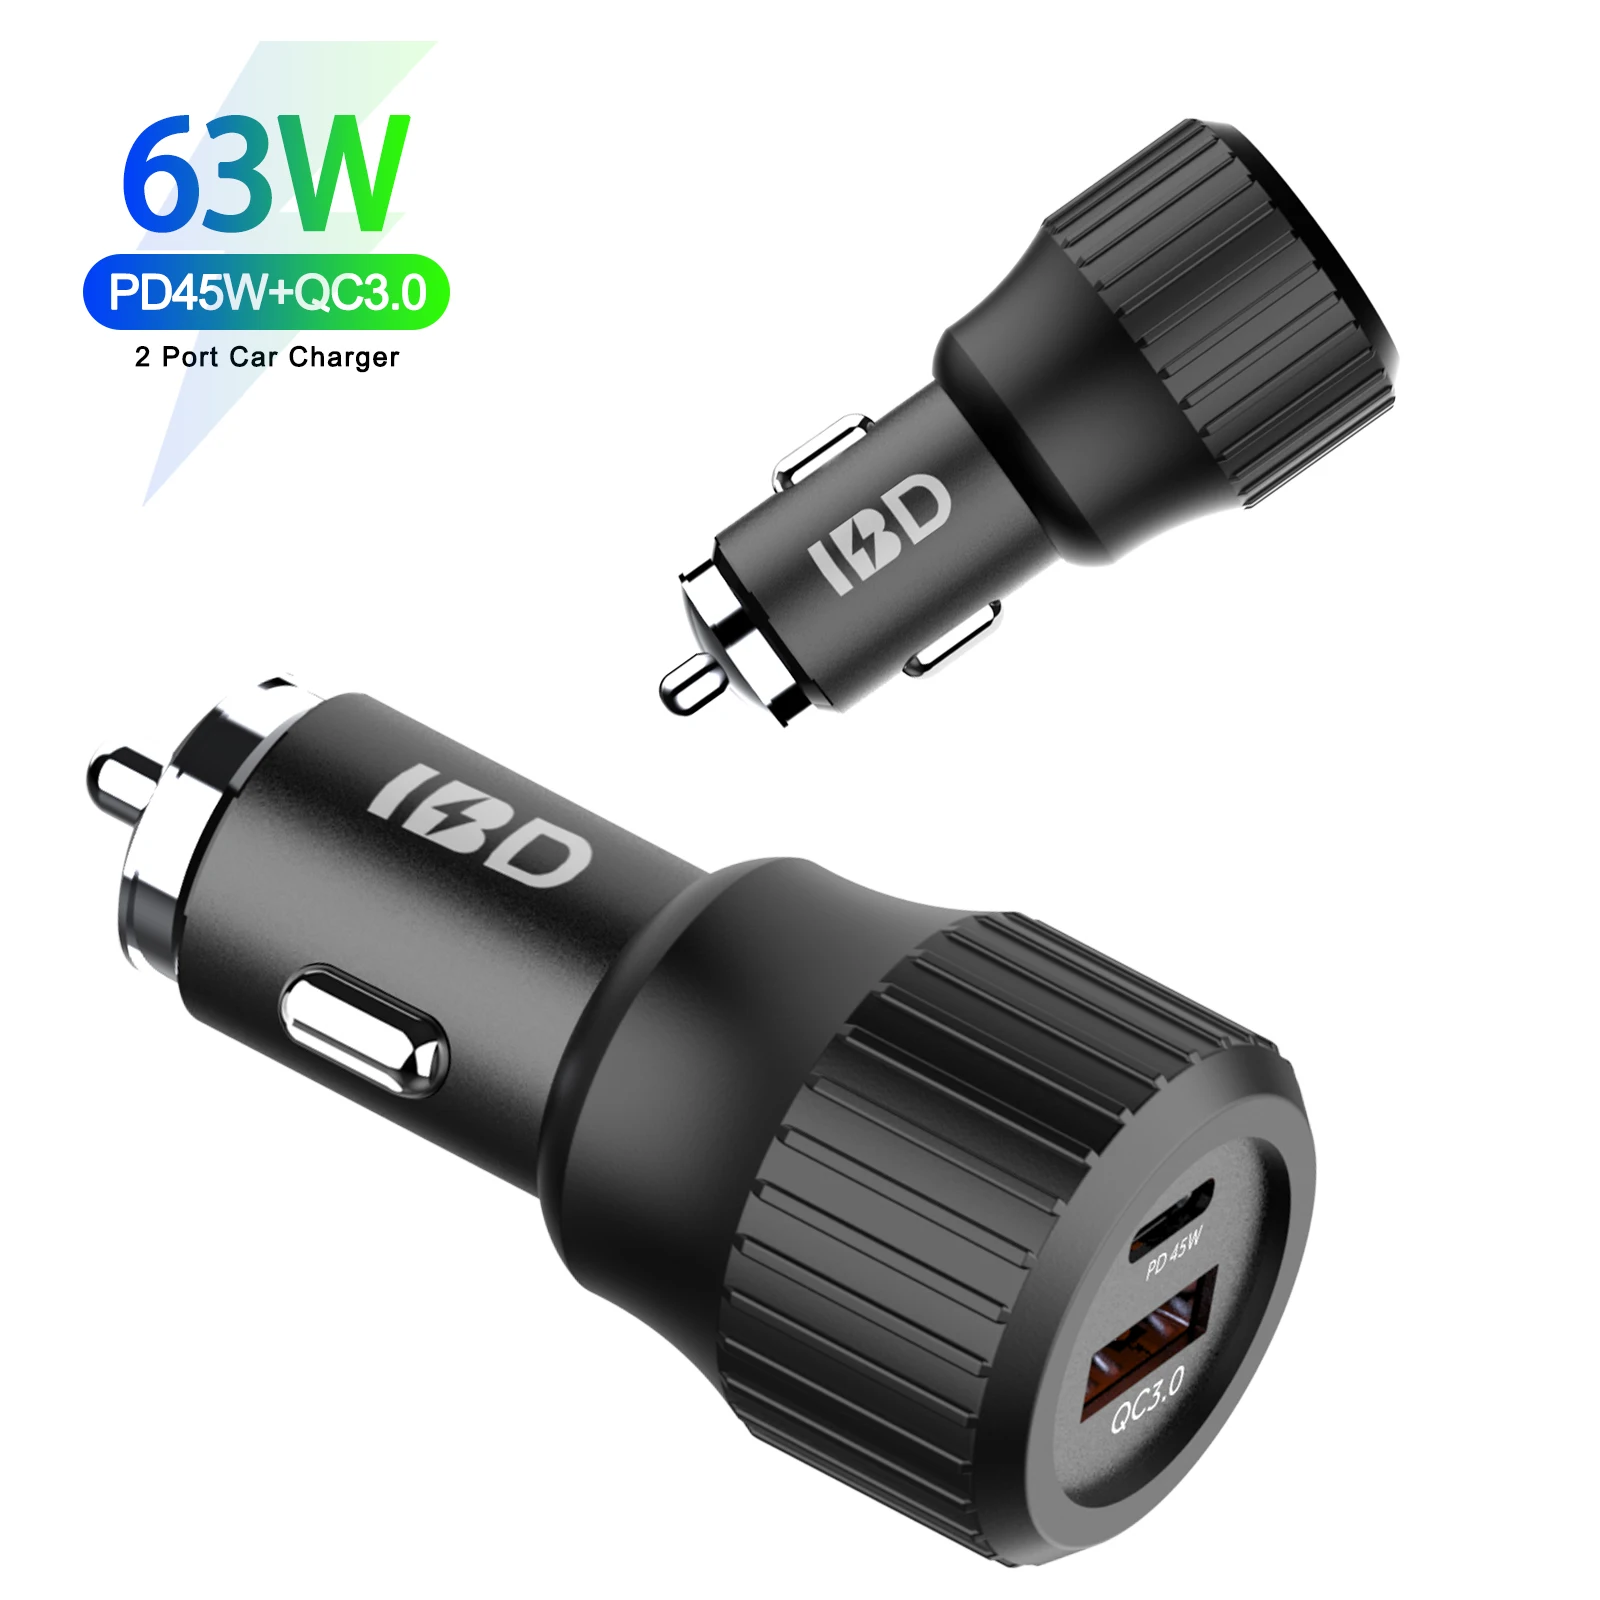 

IBD Smart Quick Car Charger 63W PD 45W Fast Usb Car Charger Dual Usb QC3.0 With PPS